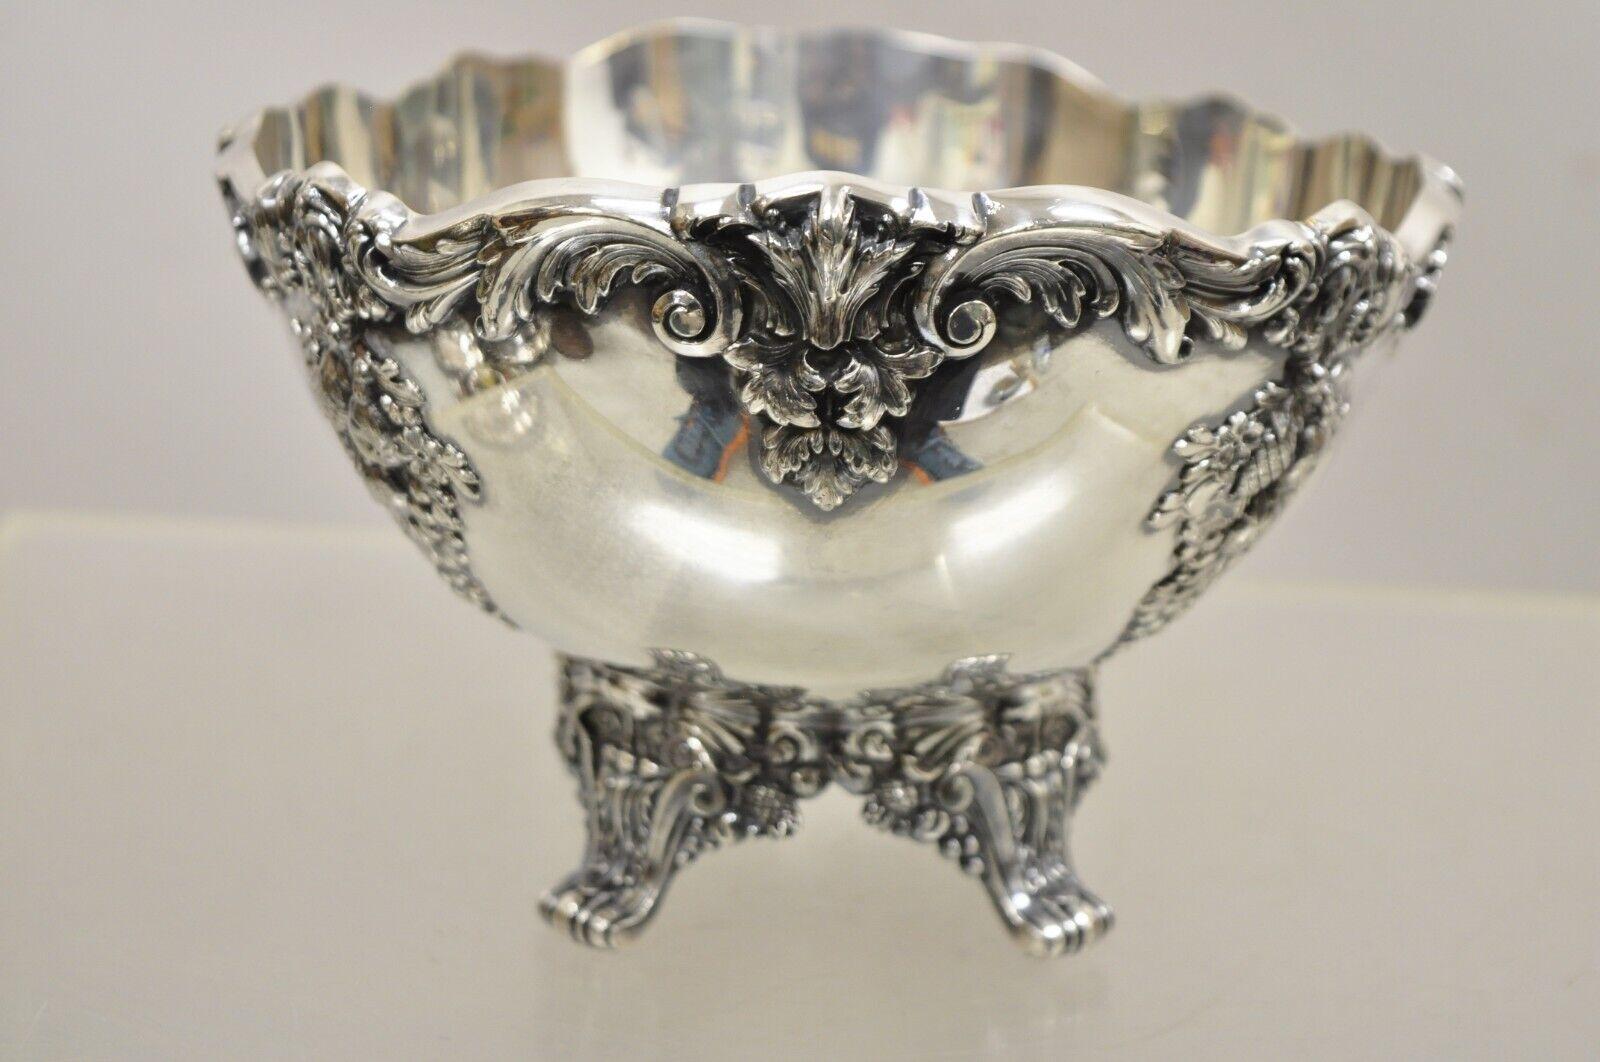 Reed & Barton King Francis 1684 Victorian Silver Plated Oval Footed Serving Bowl 7